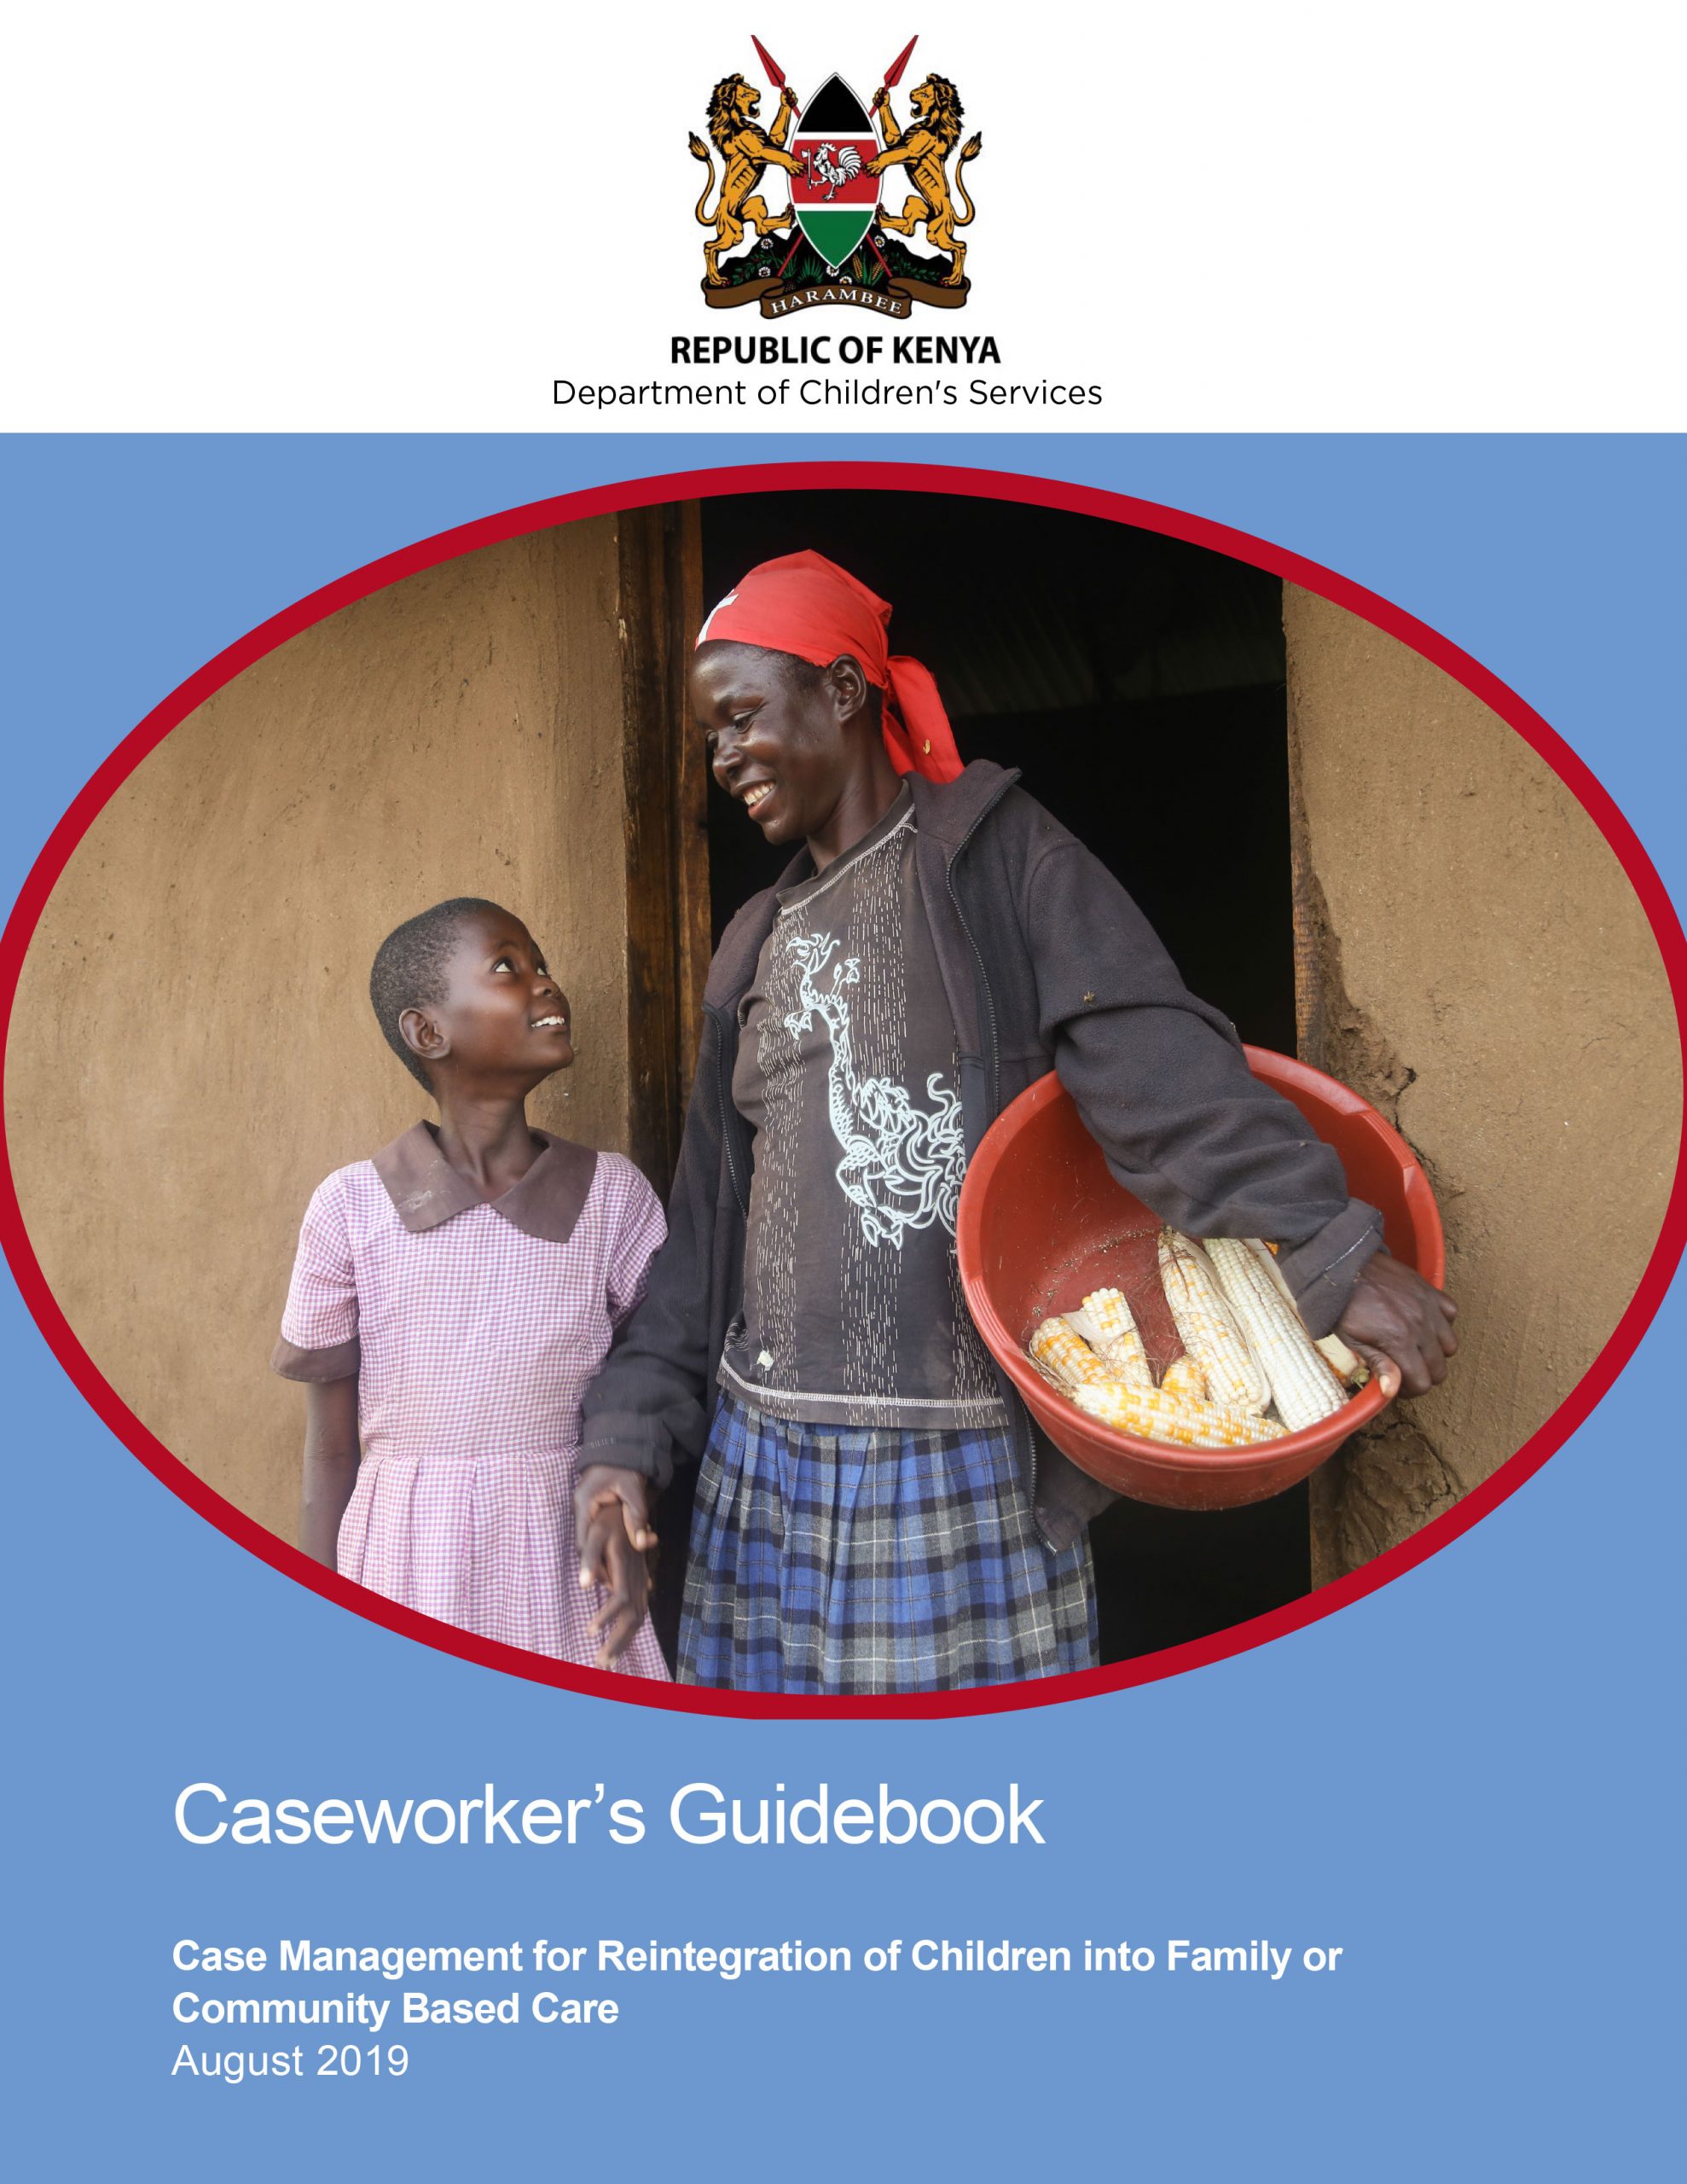 Case Management for Reintegration of Children into Family or Community Based Care - Caseworker’s Guidebook (August 2019)